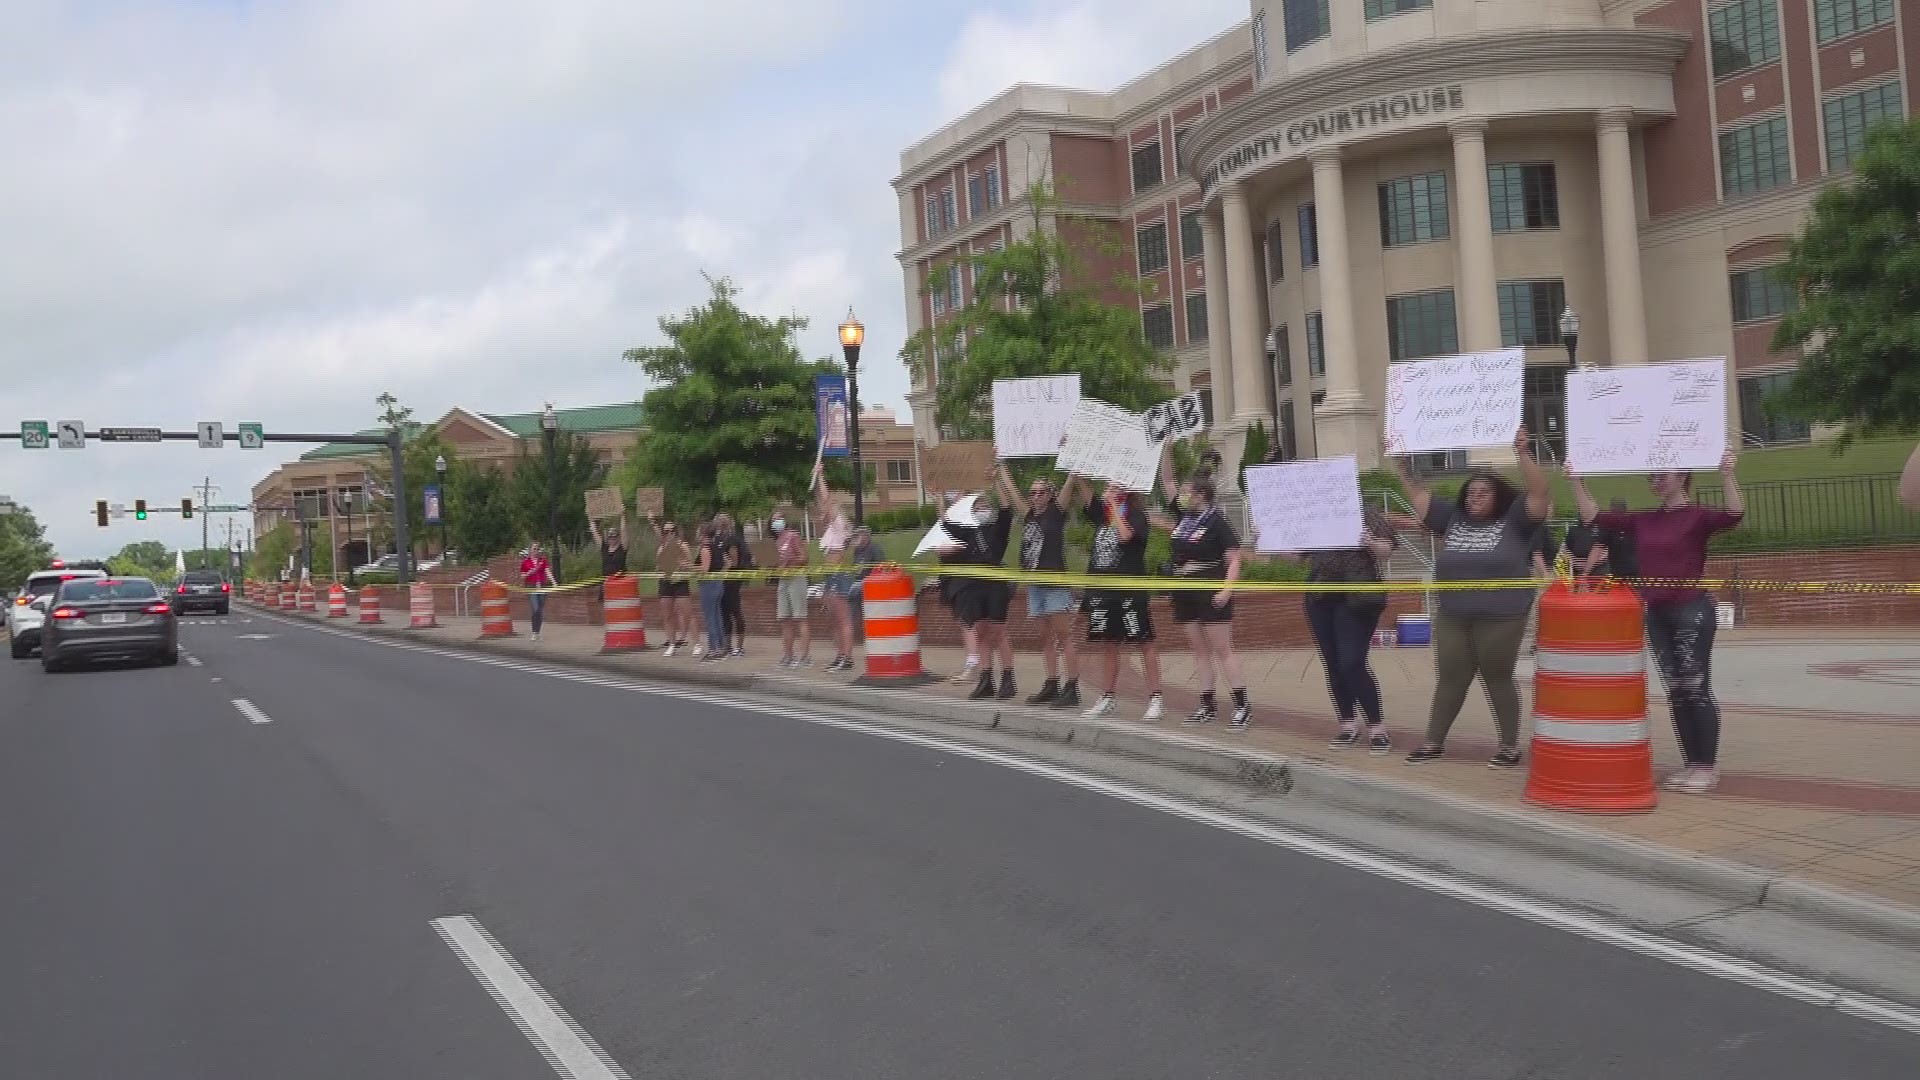 Dozens of people showed up Friday afternoon for the planned protest.